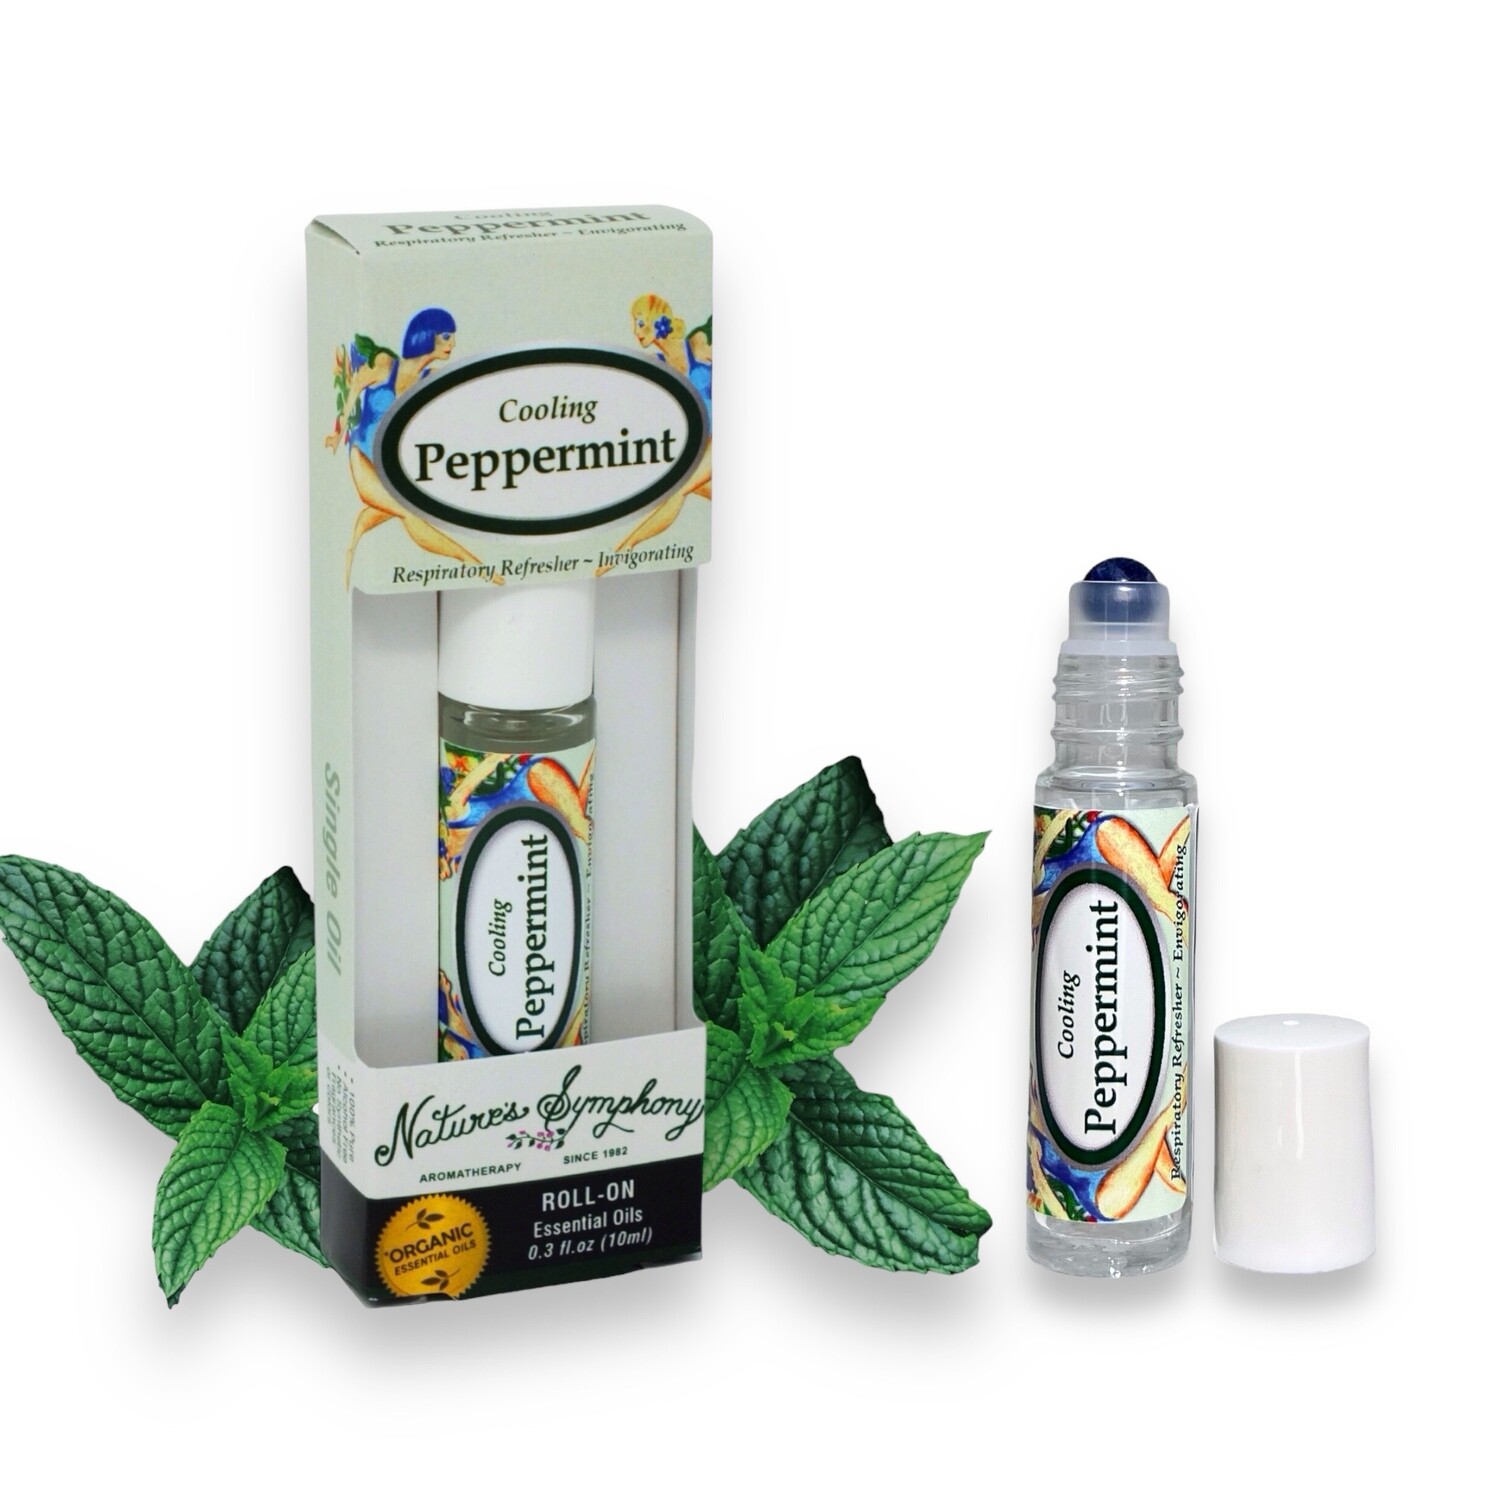 Cooling Peppermint, Roll-On, Blend Organic/Wildcrafted - 10ml